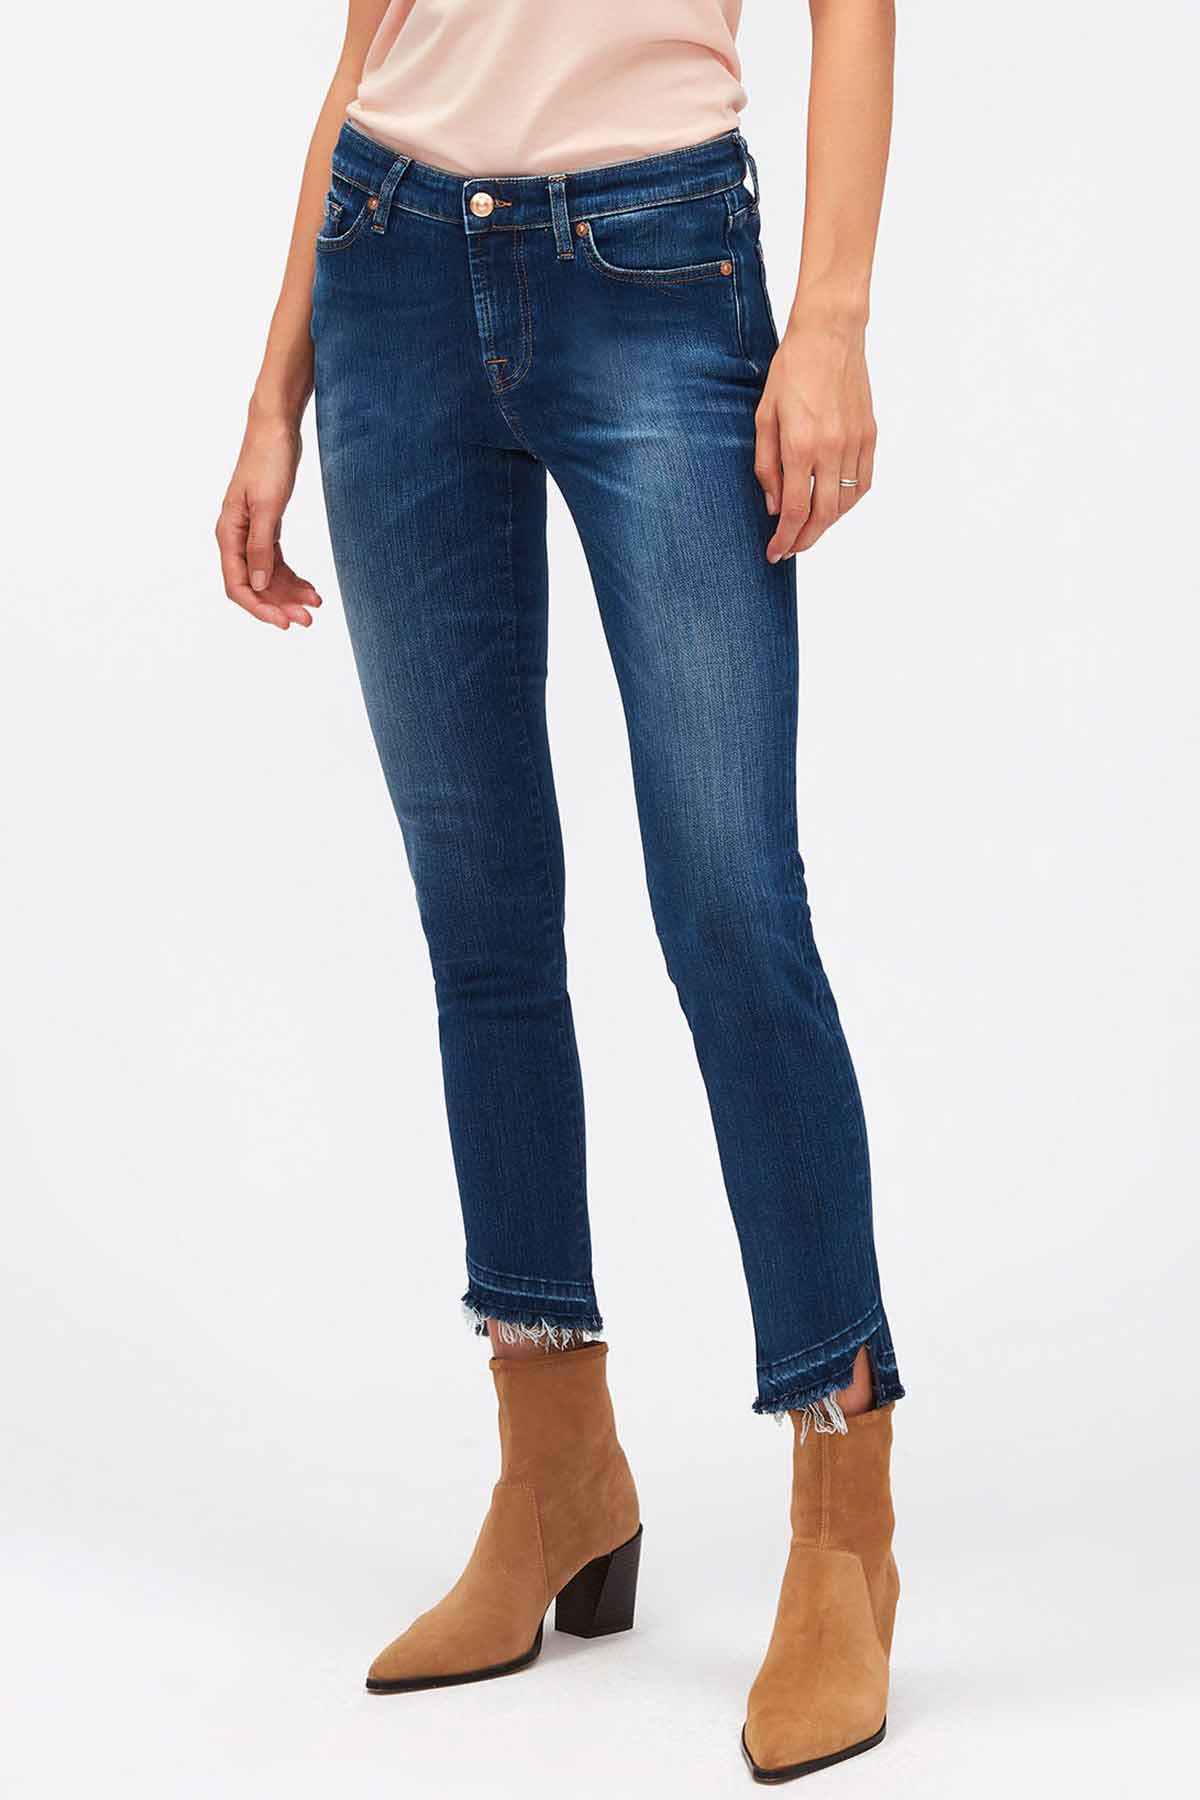 7 For All Mankind Pyper Crop Classic Slim Fit Jeans-Libas Trendy Fashion Store